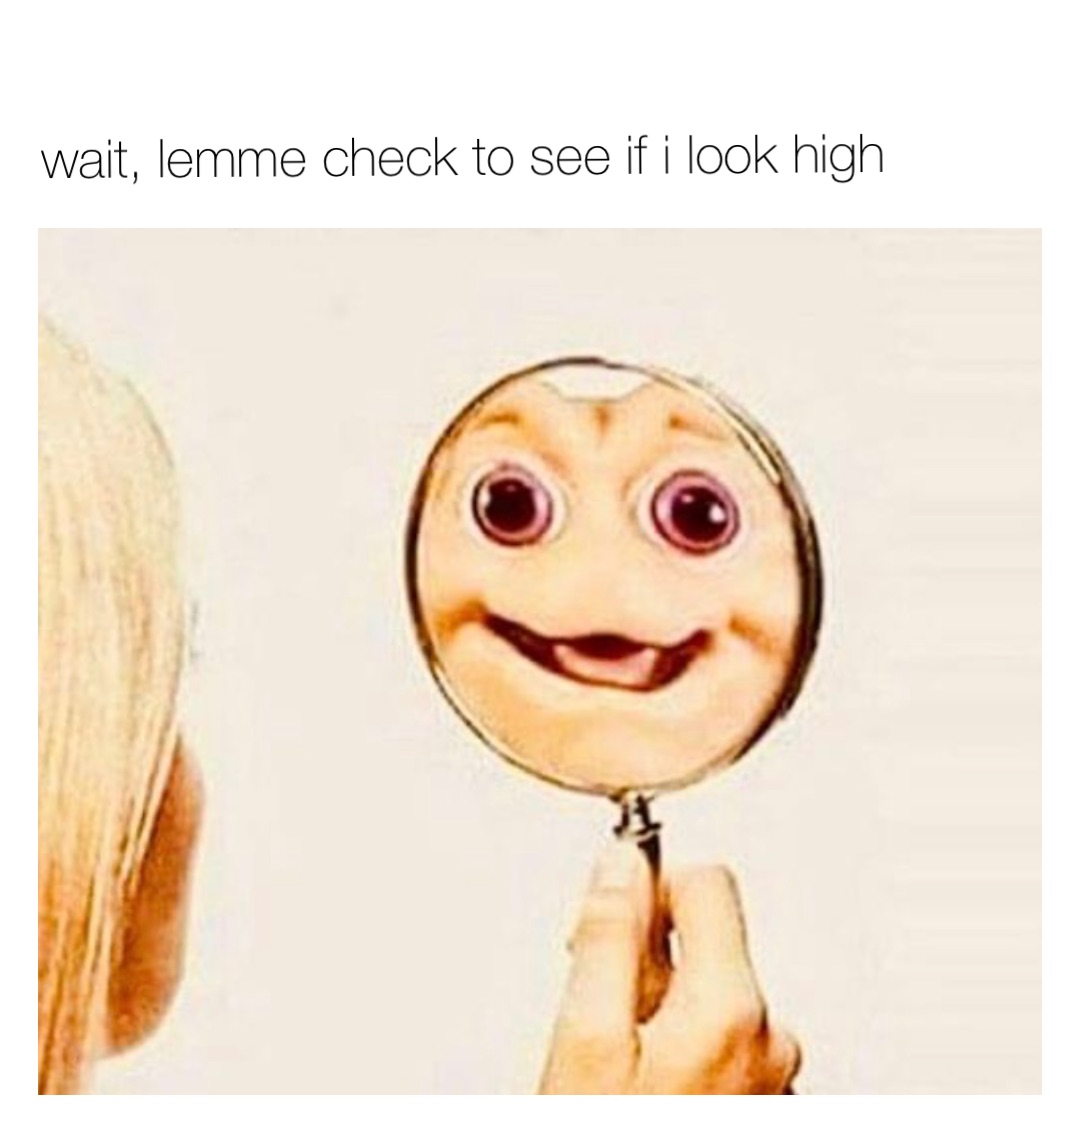 wait, lemme check to see if i look high